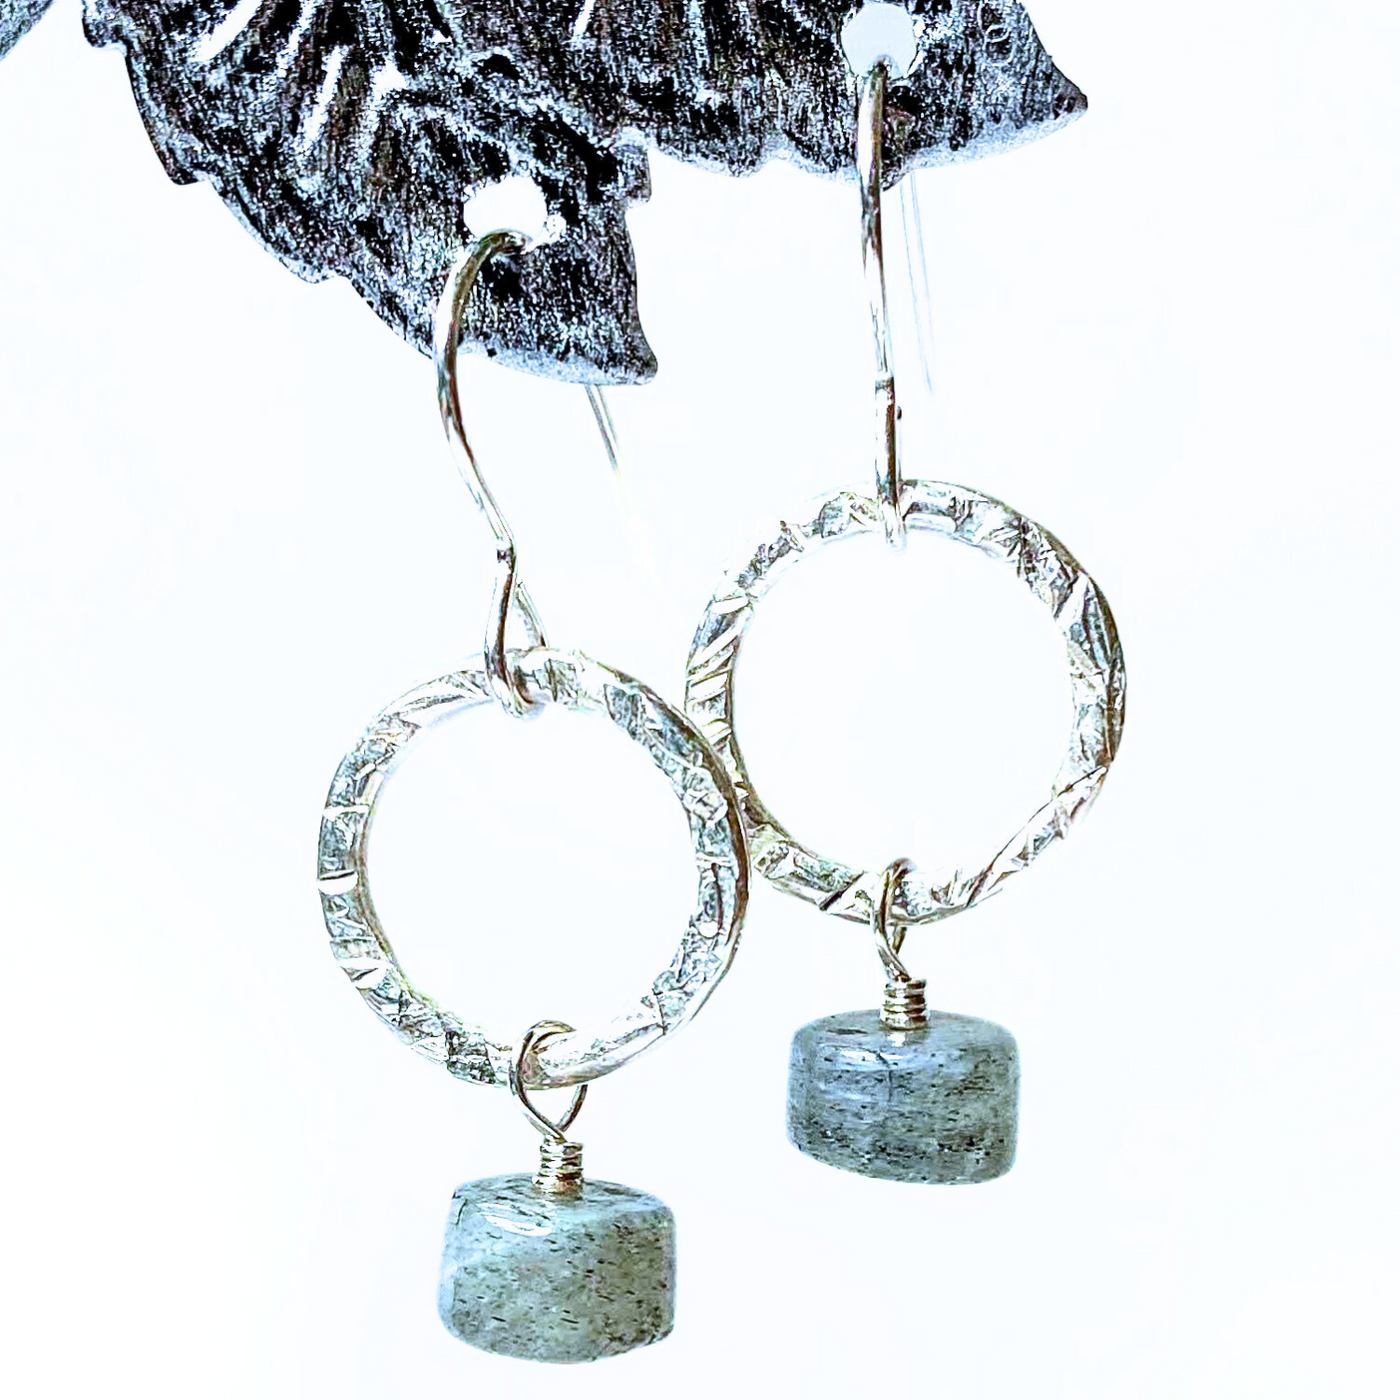 SA-053 Textured Ring Earrings w/Cylinder Labradorite